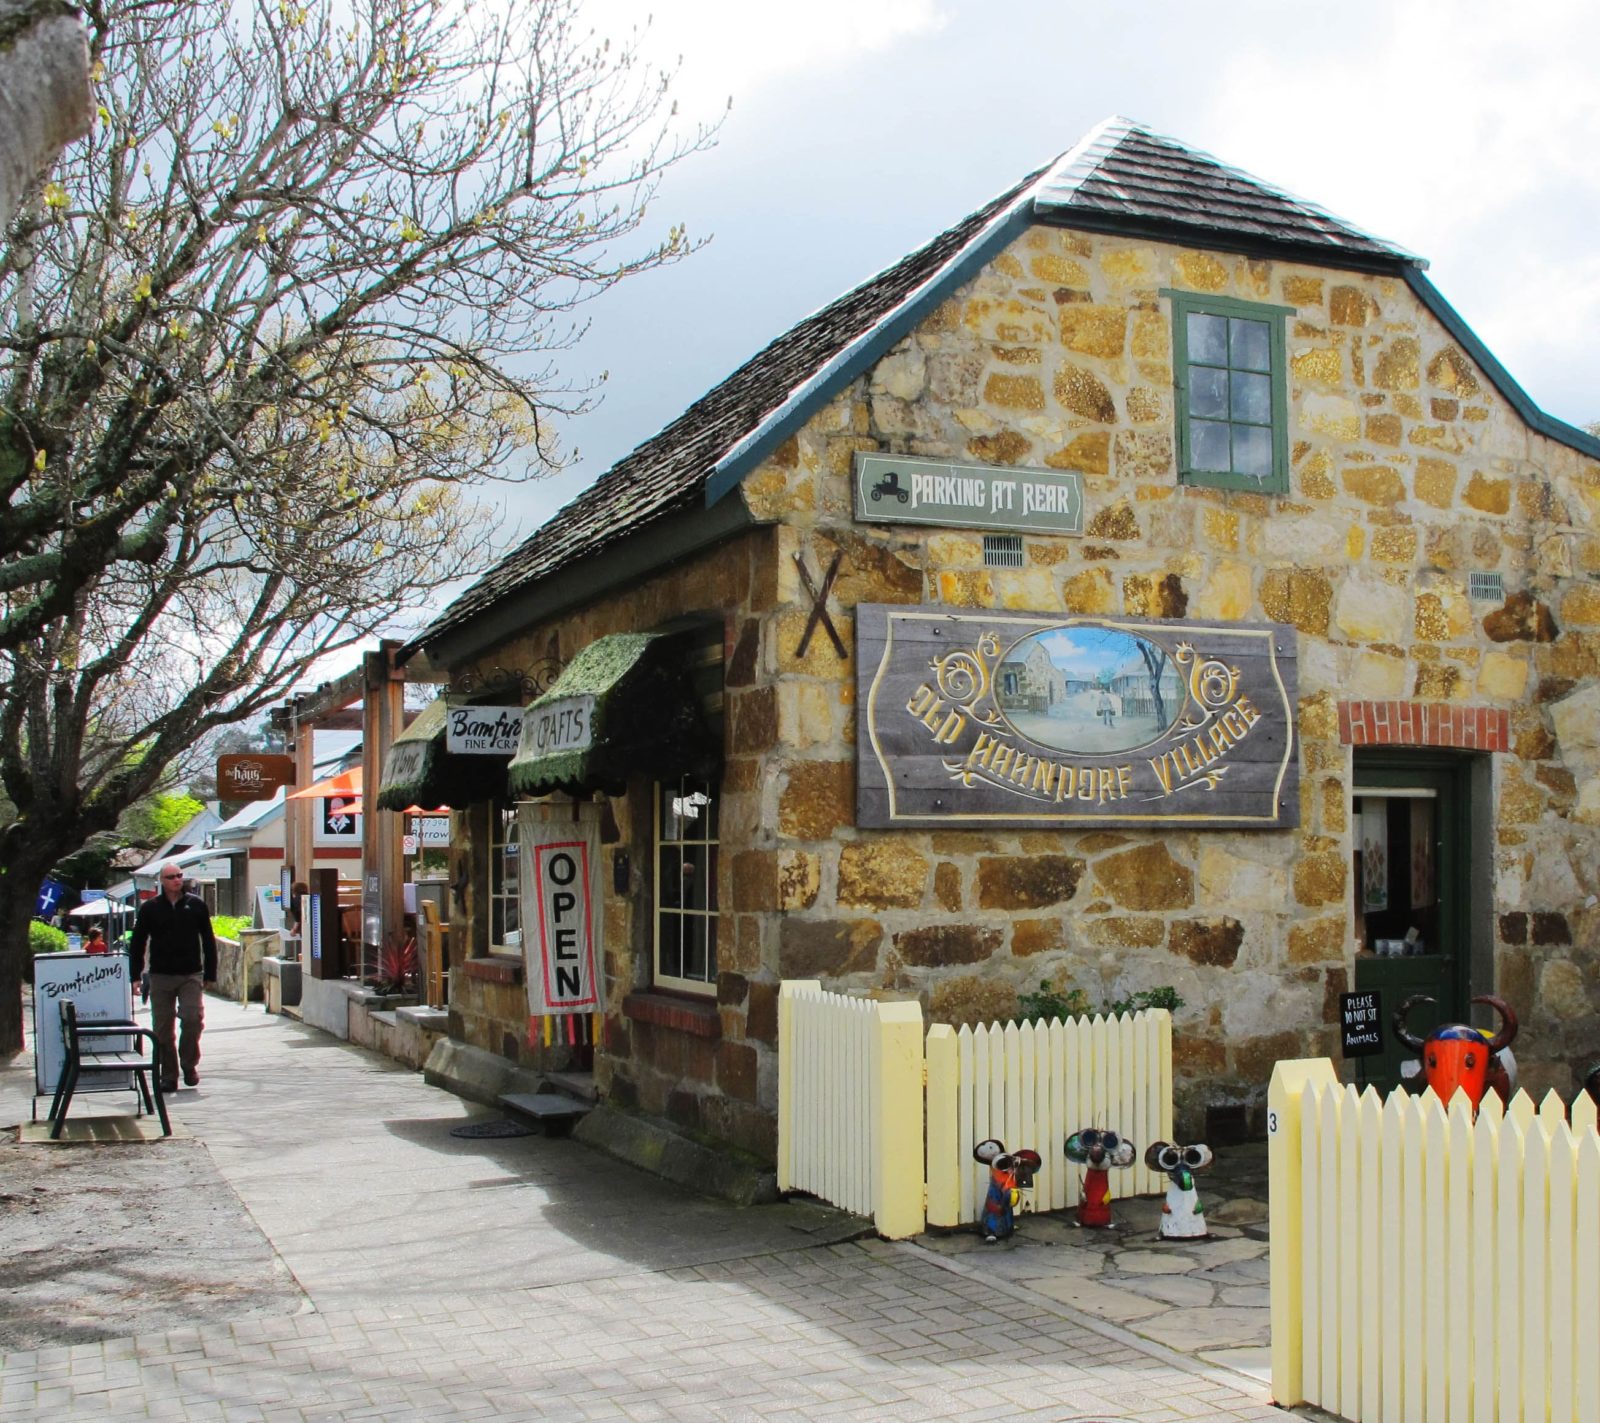 Adelaide Hills and Hahndorf Hideaway Tour